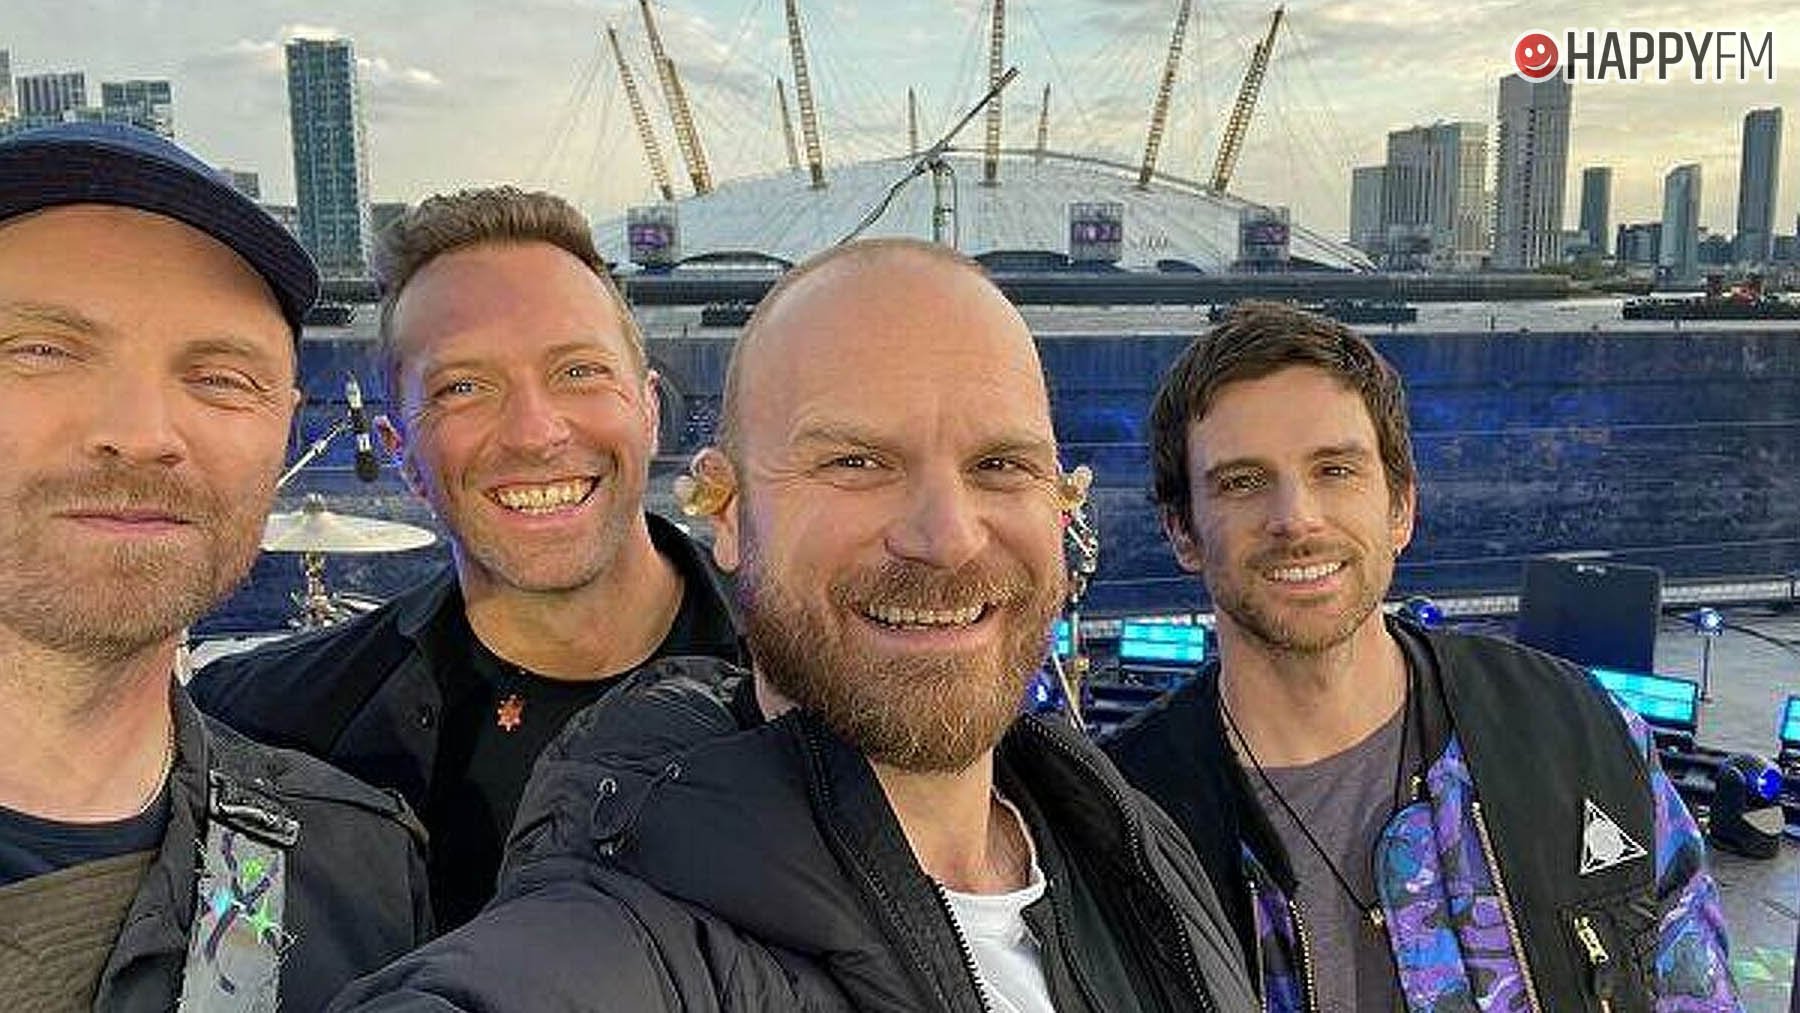 Coldplay.